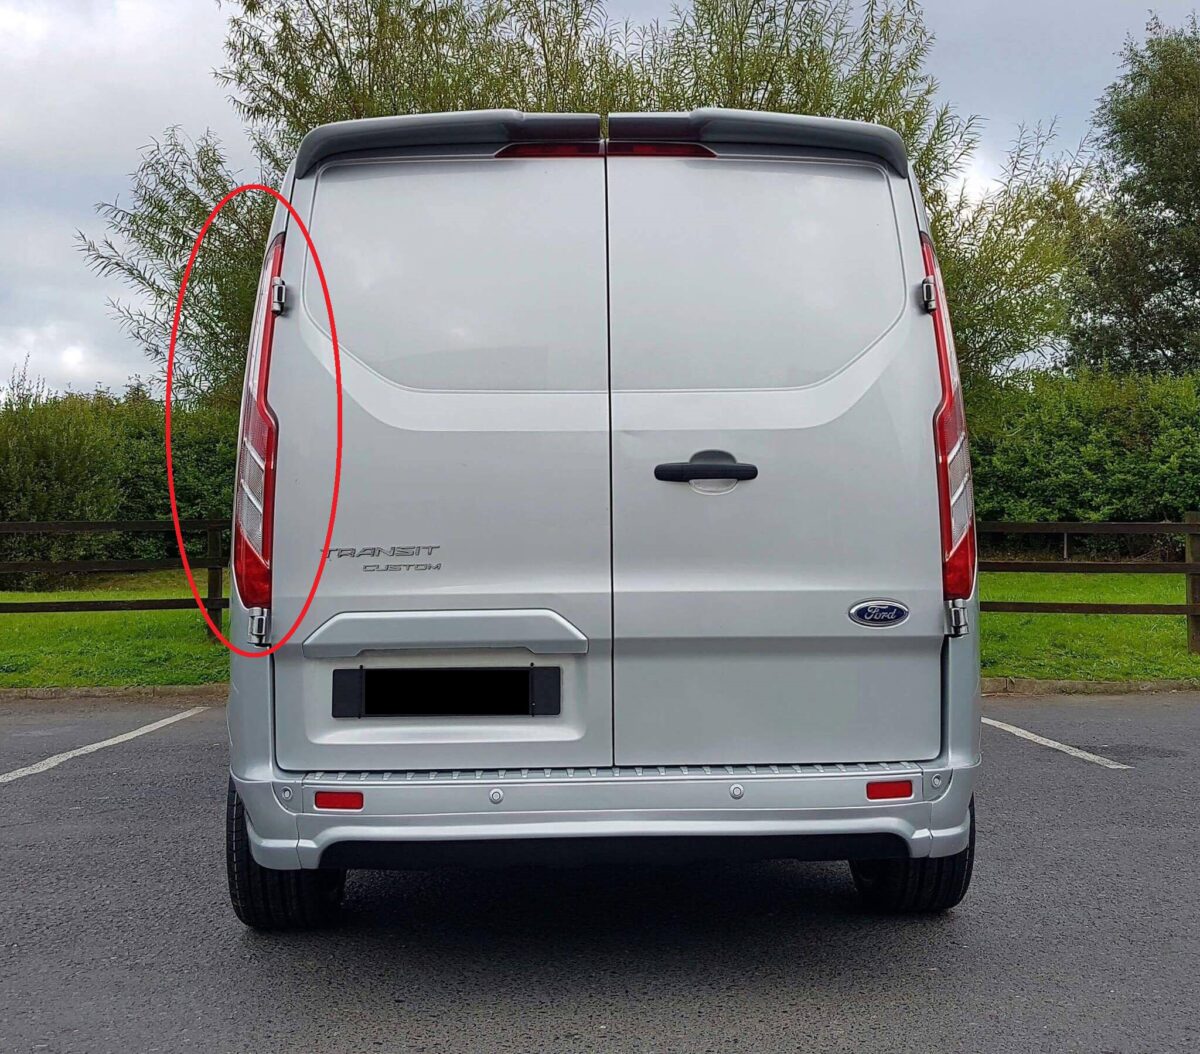 How to Remove and Replace Tail Light Bulbs on a 2019 Ford Transit Custom